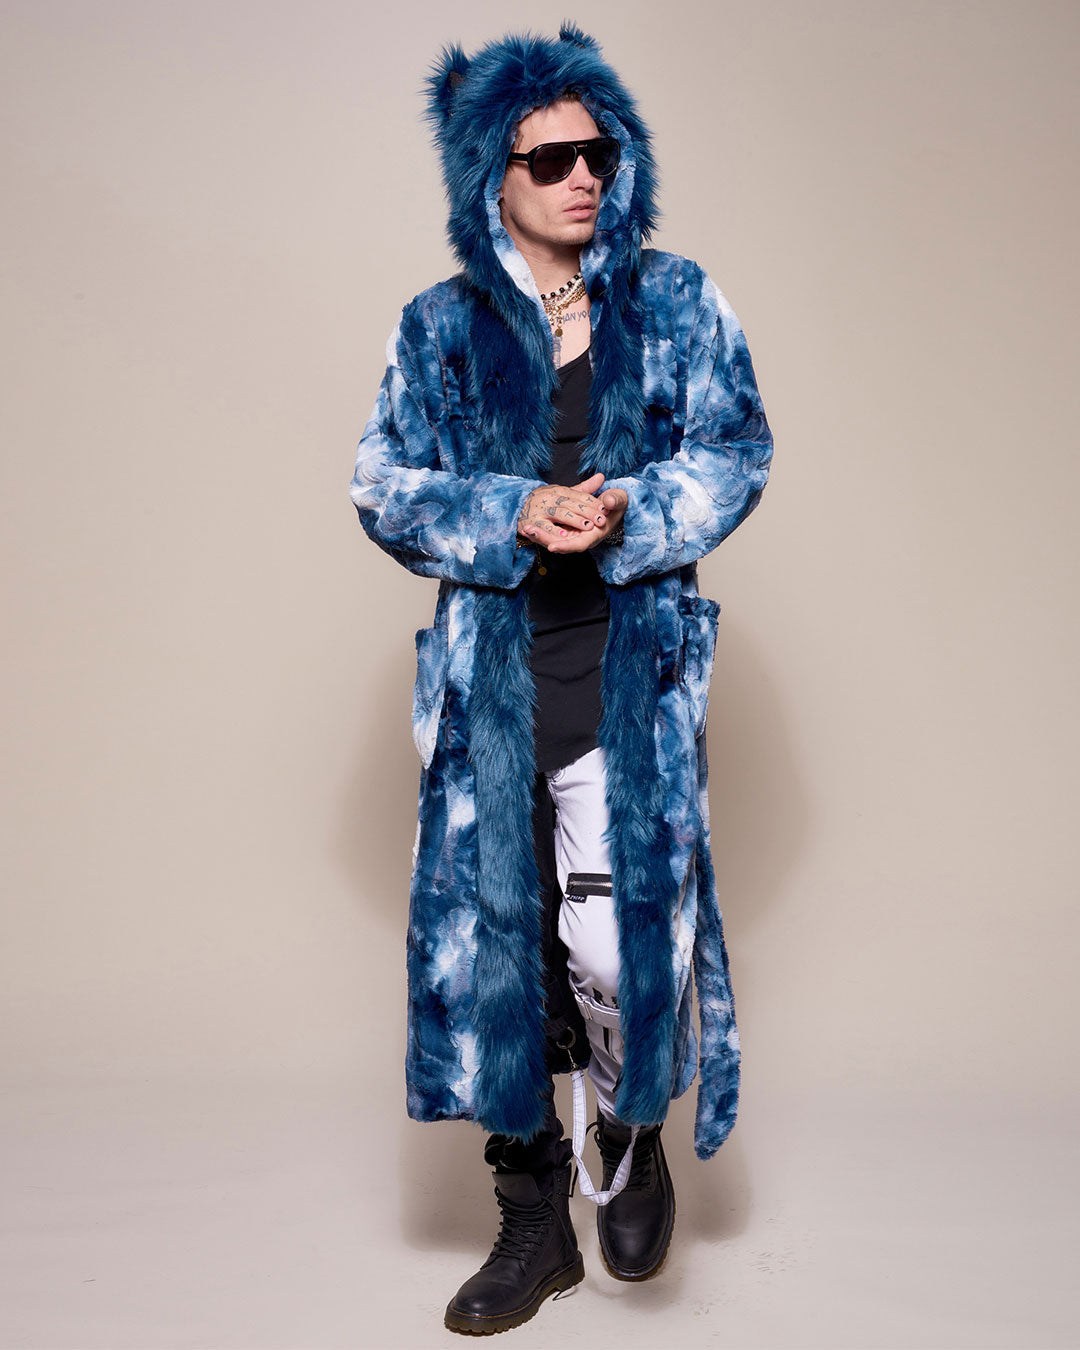 Classic Faux Fur Style Robe for Men in Water Wolf Design Worn Over Ripped Jeans | Men&#39;s - SpiritHoods